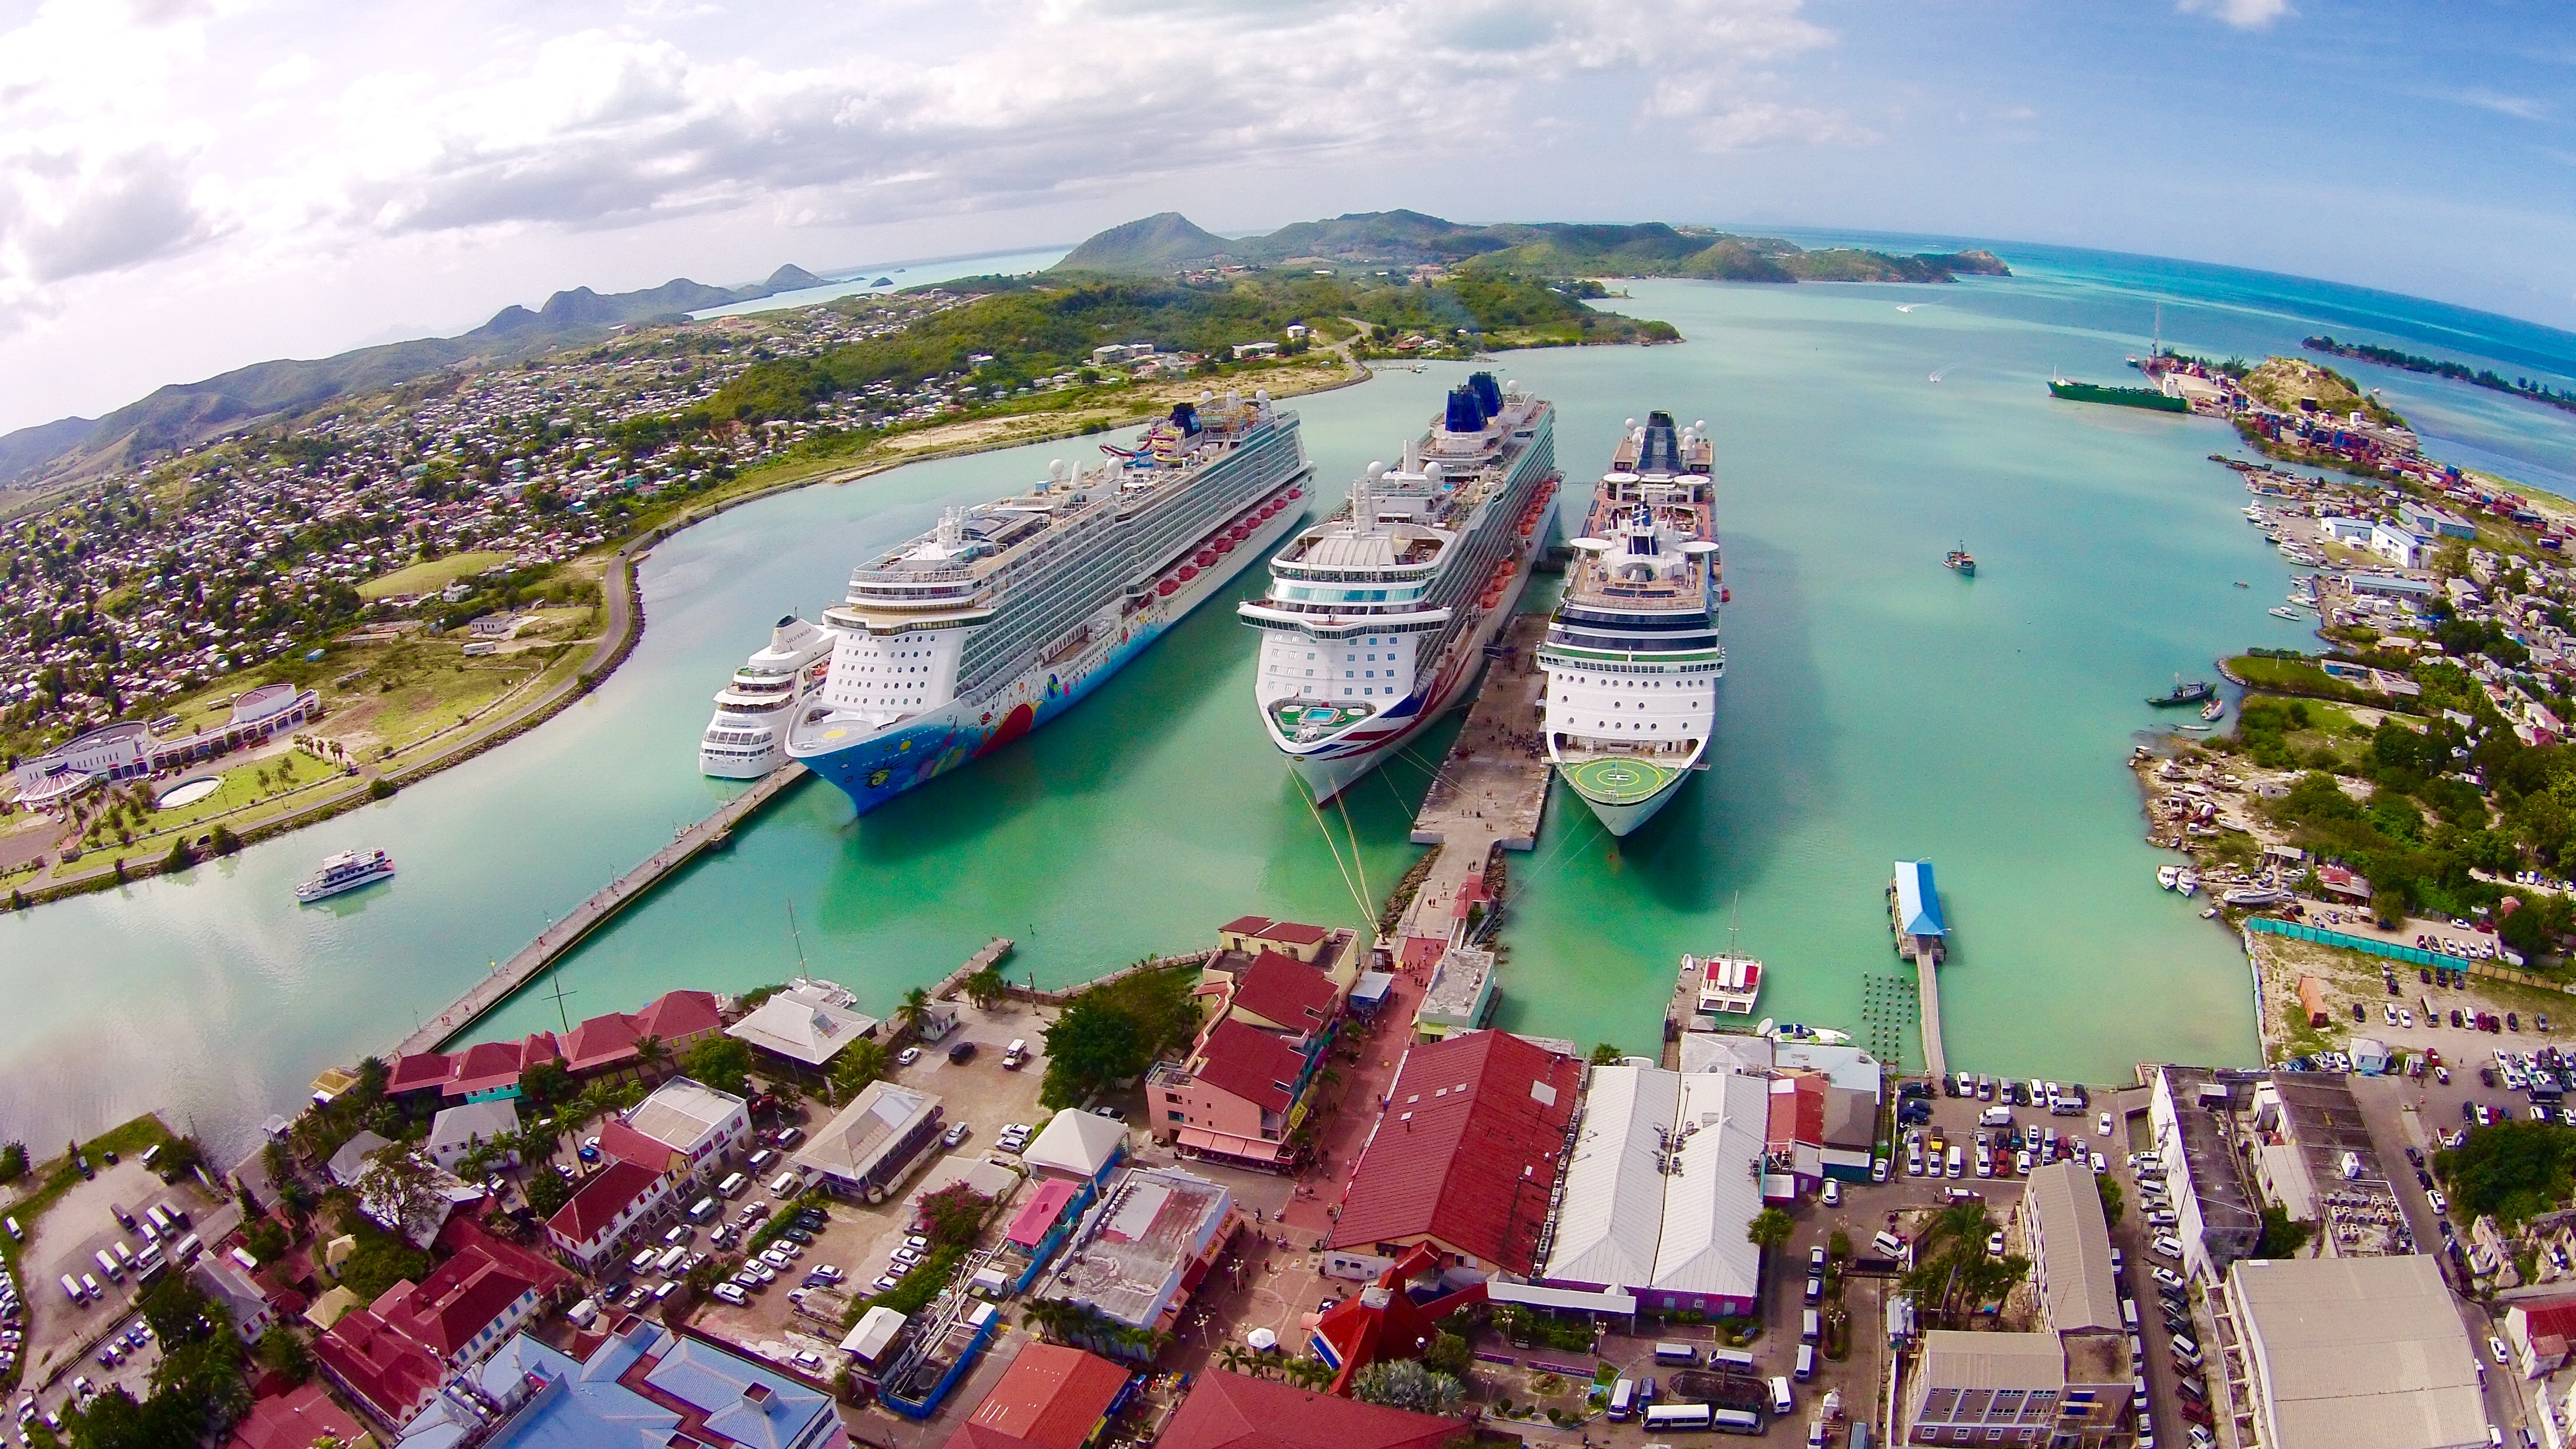 Cruise tourism industry set for steady growth in 2019 and beyond